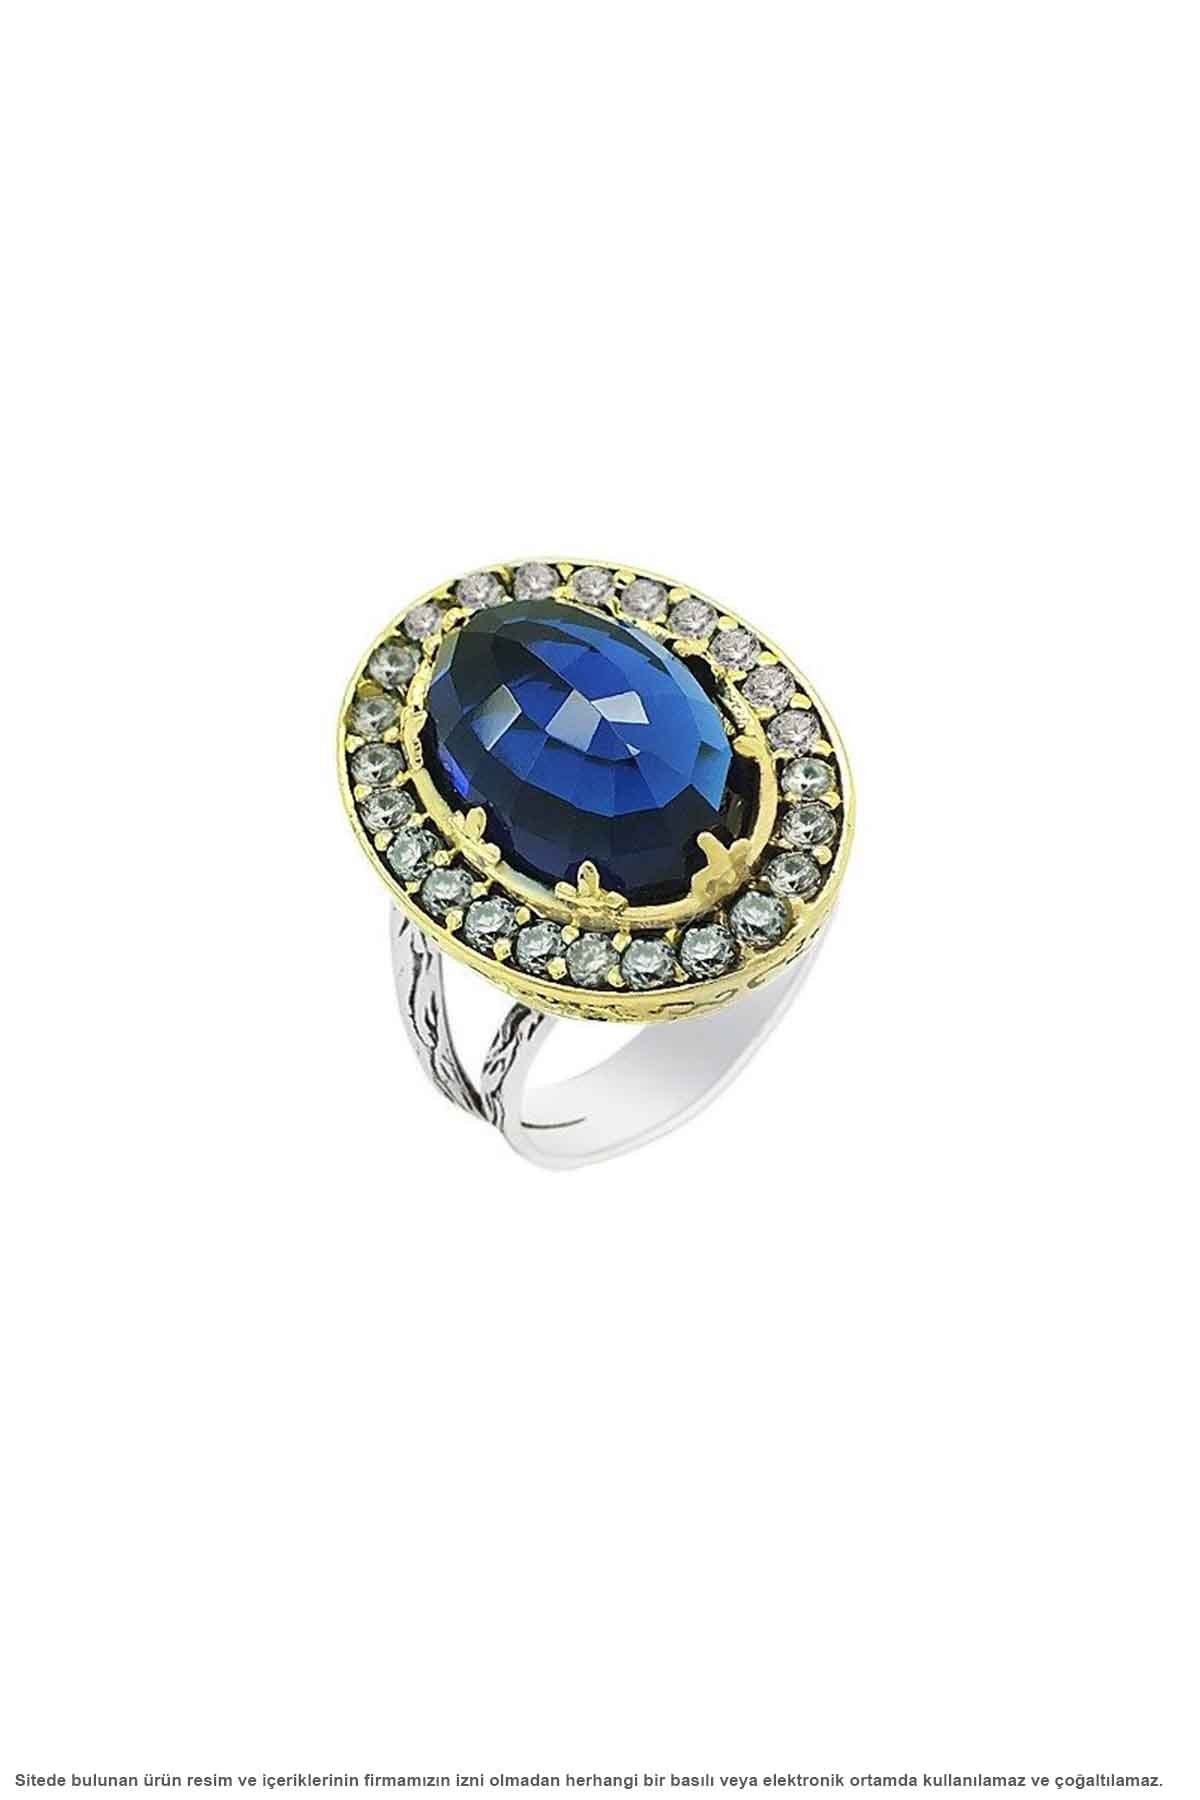 Halime Sultan Series Authentic Women's Ring with Silver Sapphire Stone